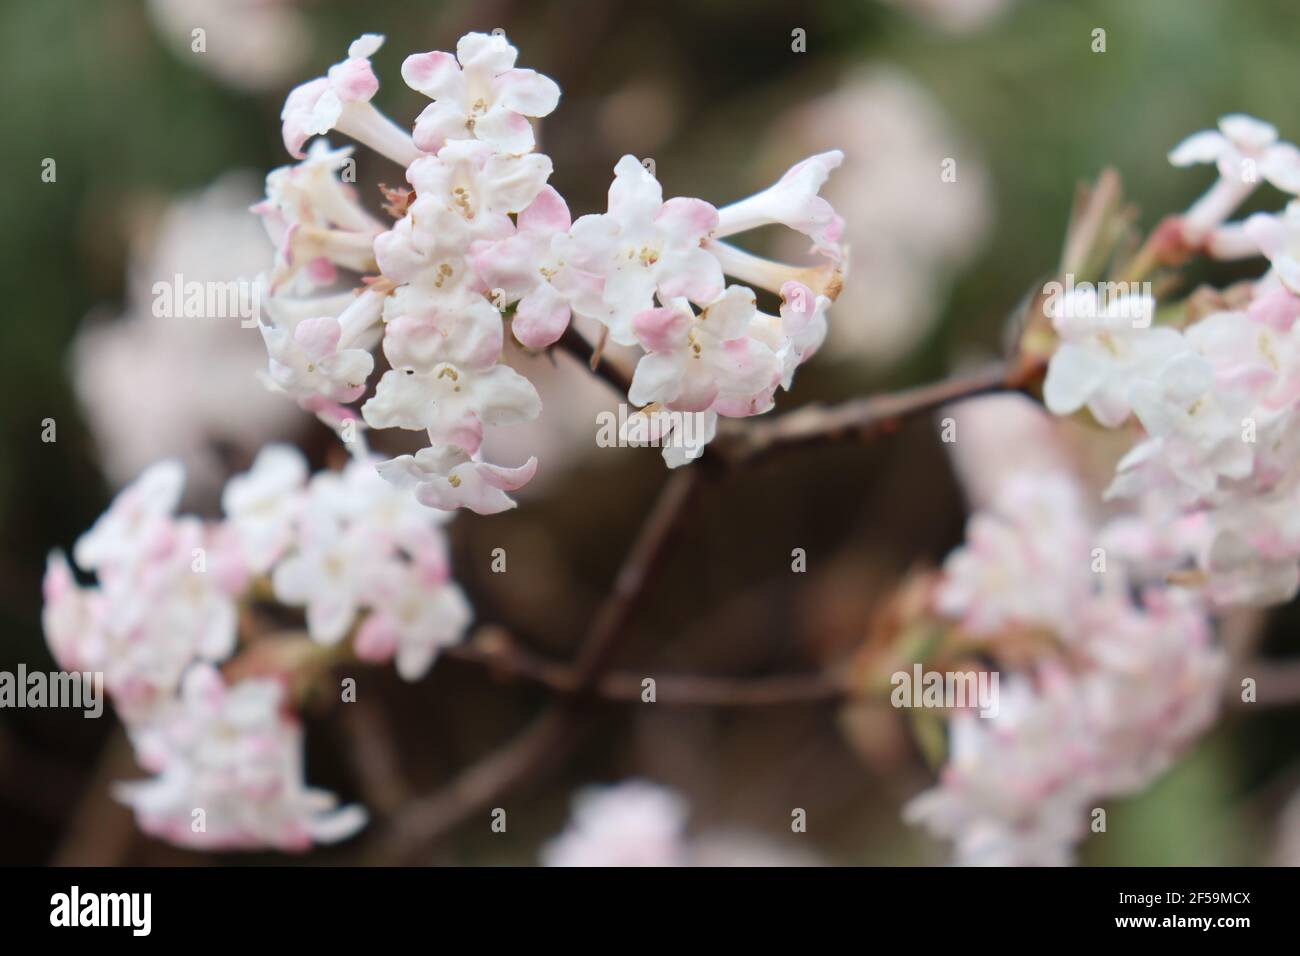 Light coloured plant blooming. Stock Photo